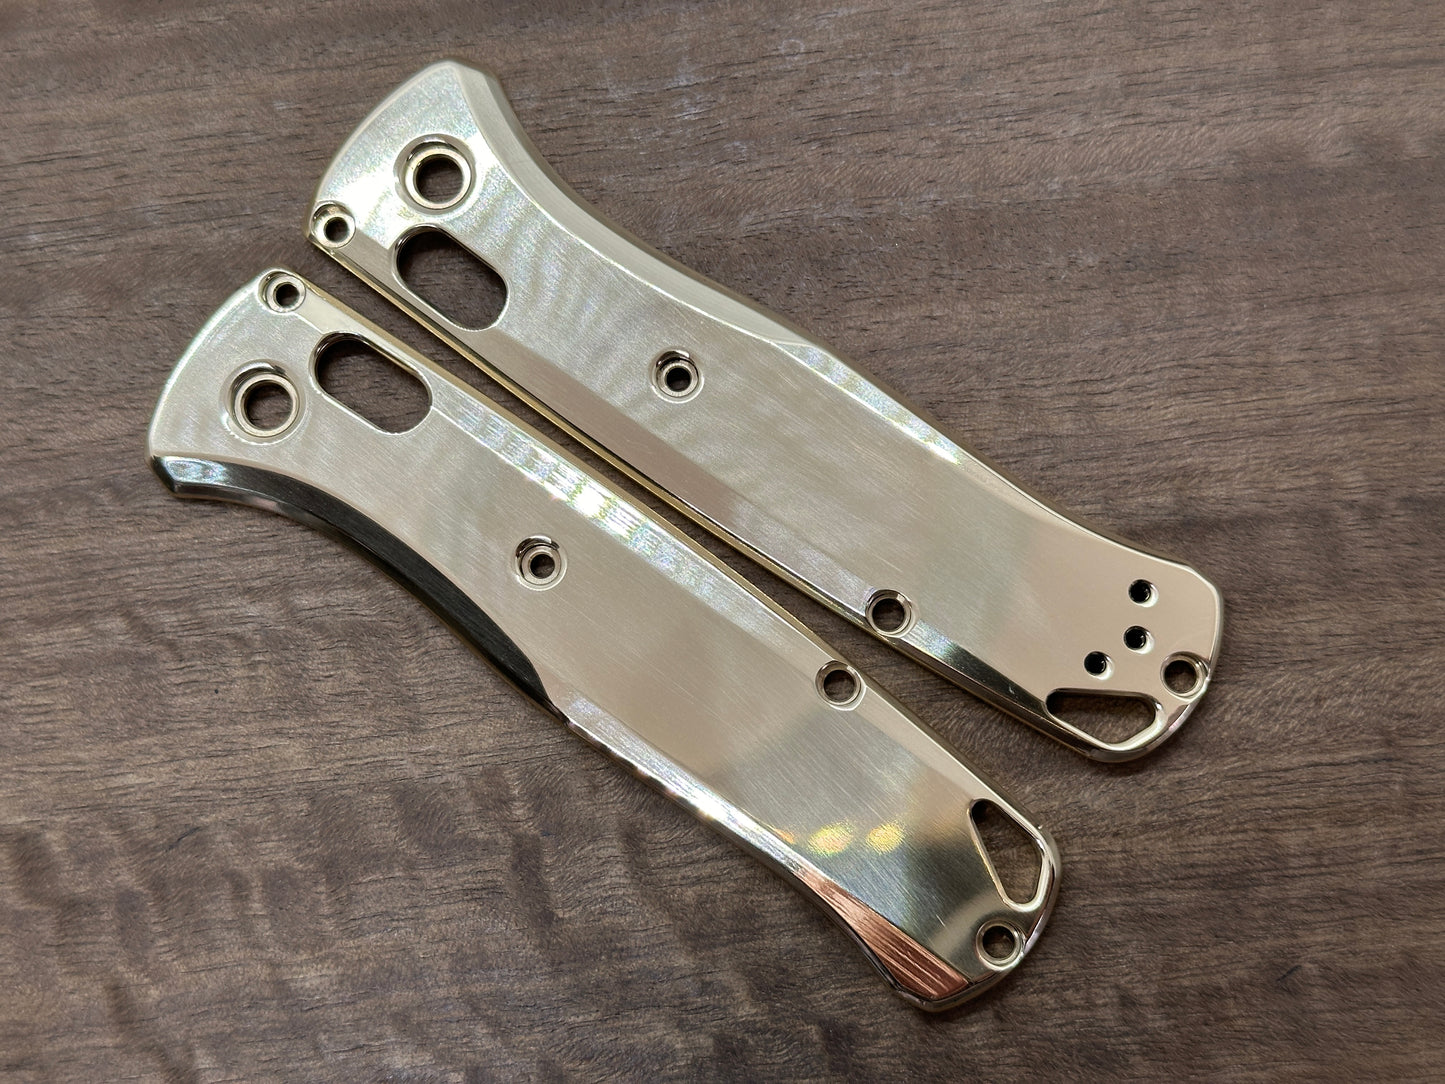 Polished Brass Scales for Benchmade Bugout 535